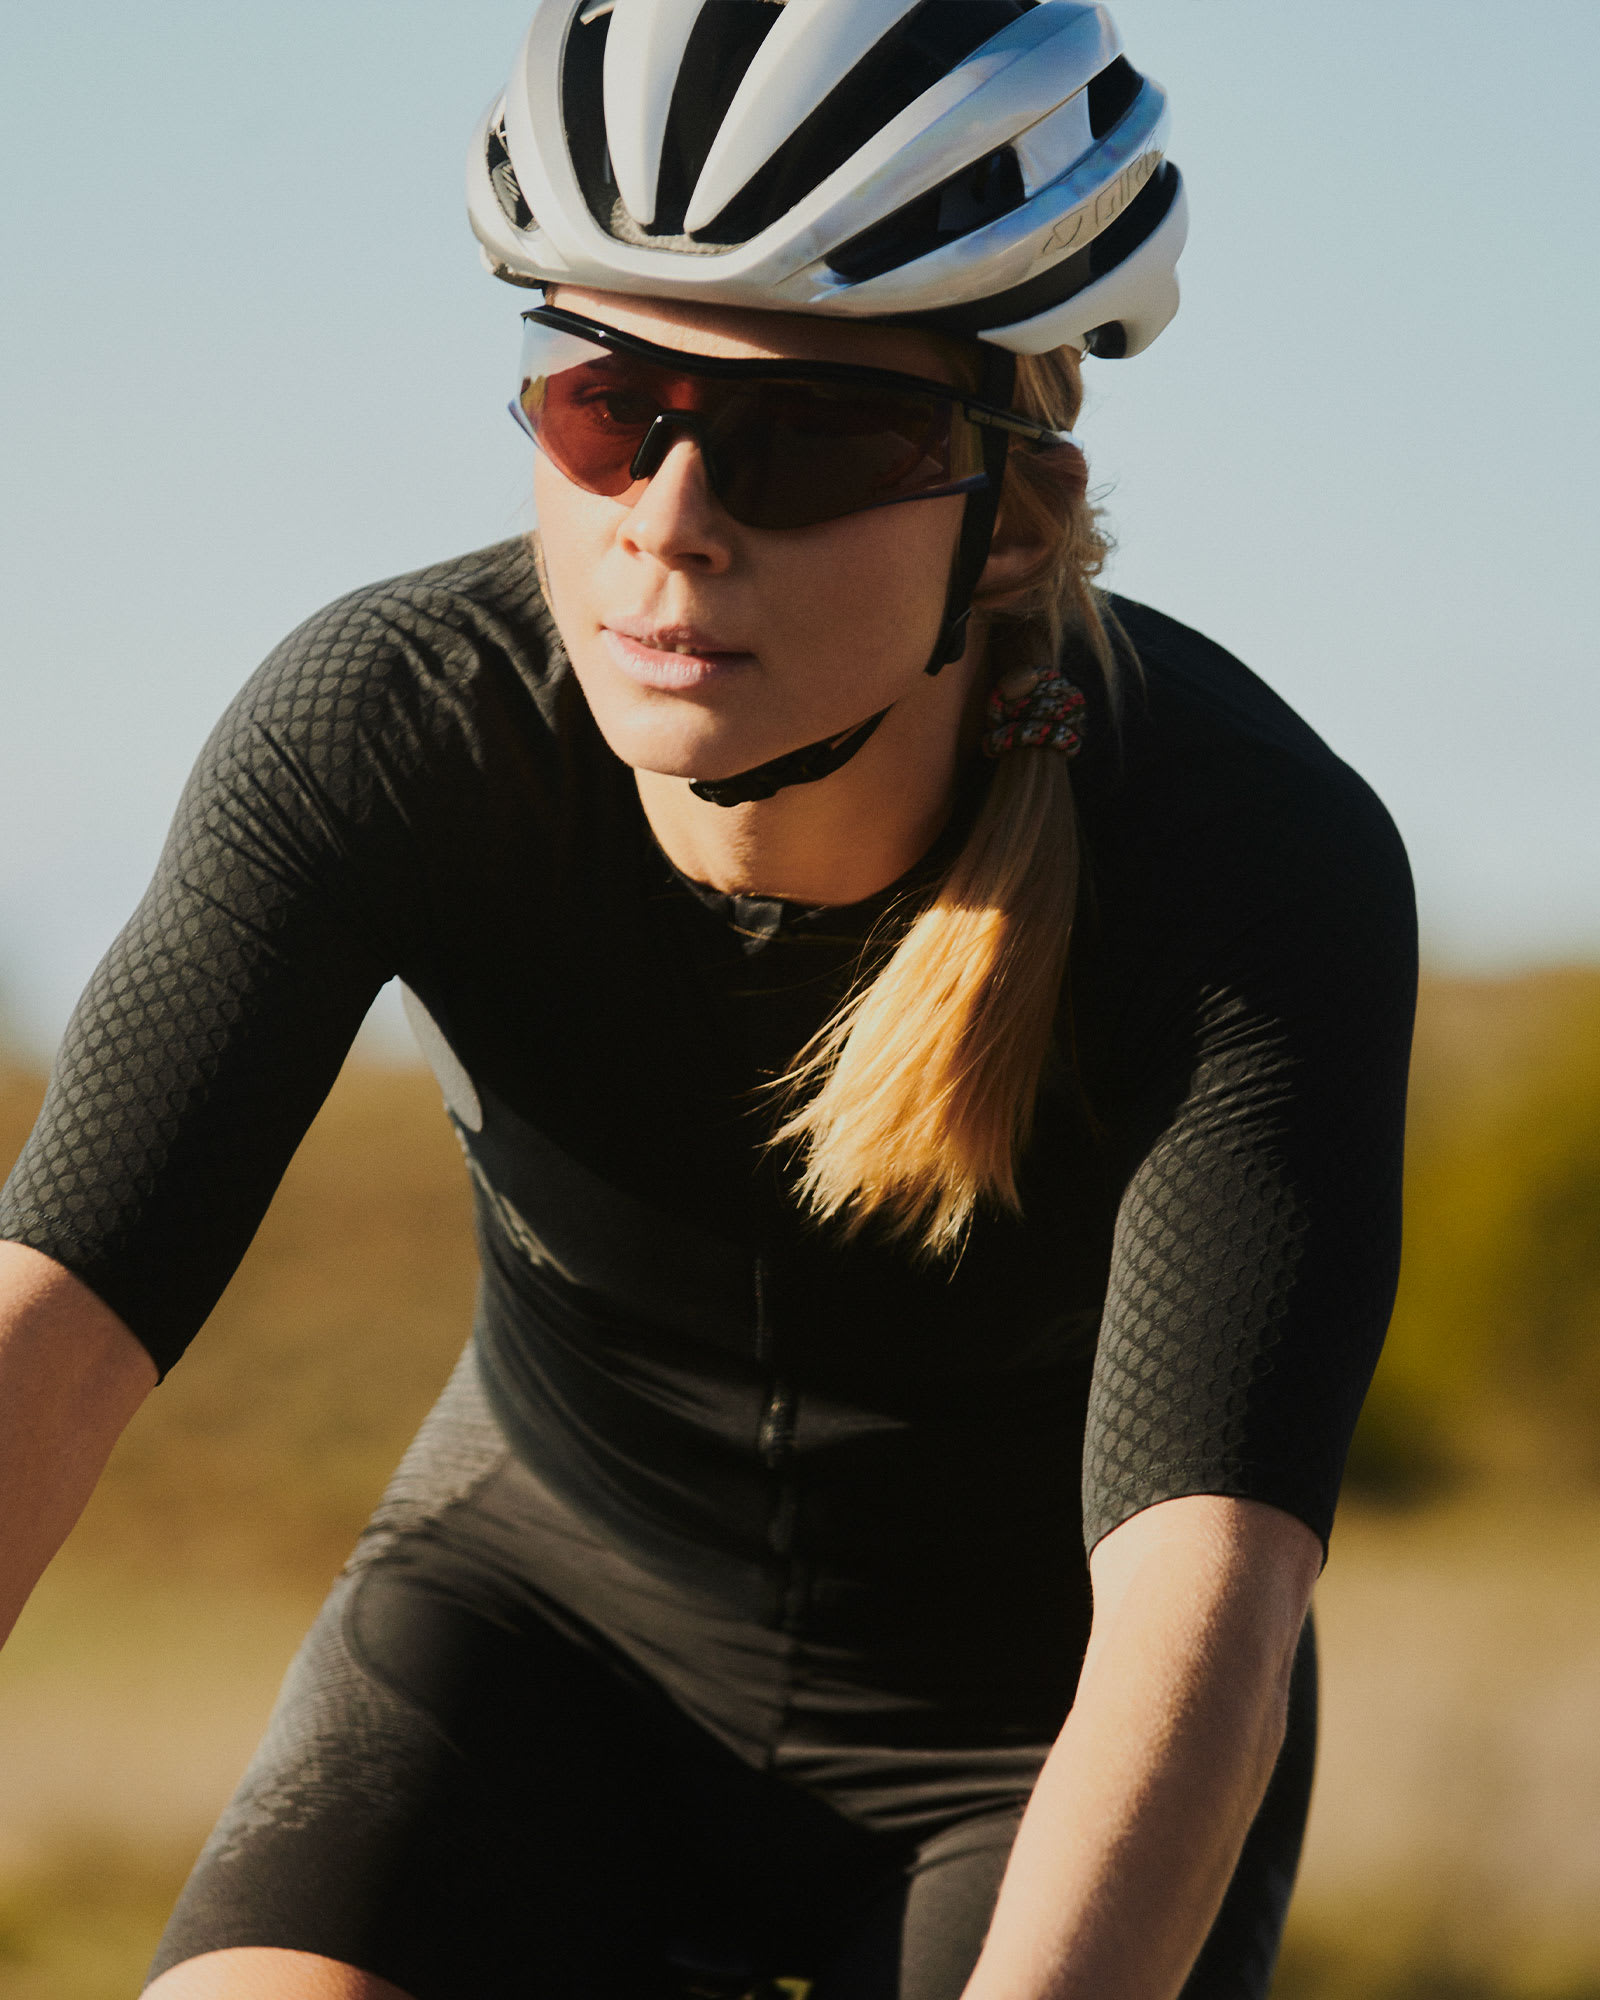 The World's Finest Cycling Clothing and Accessories. | Rapha